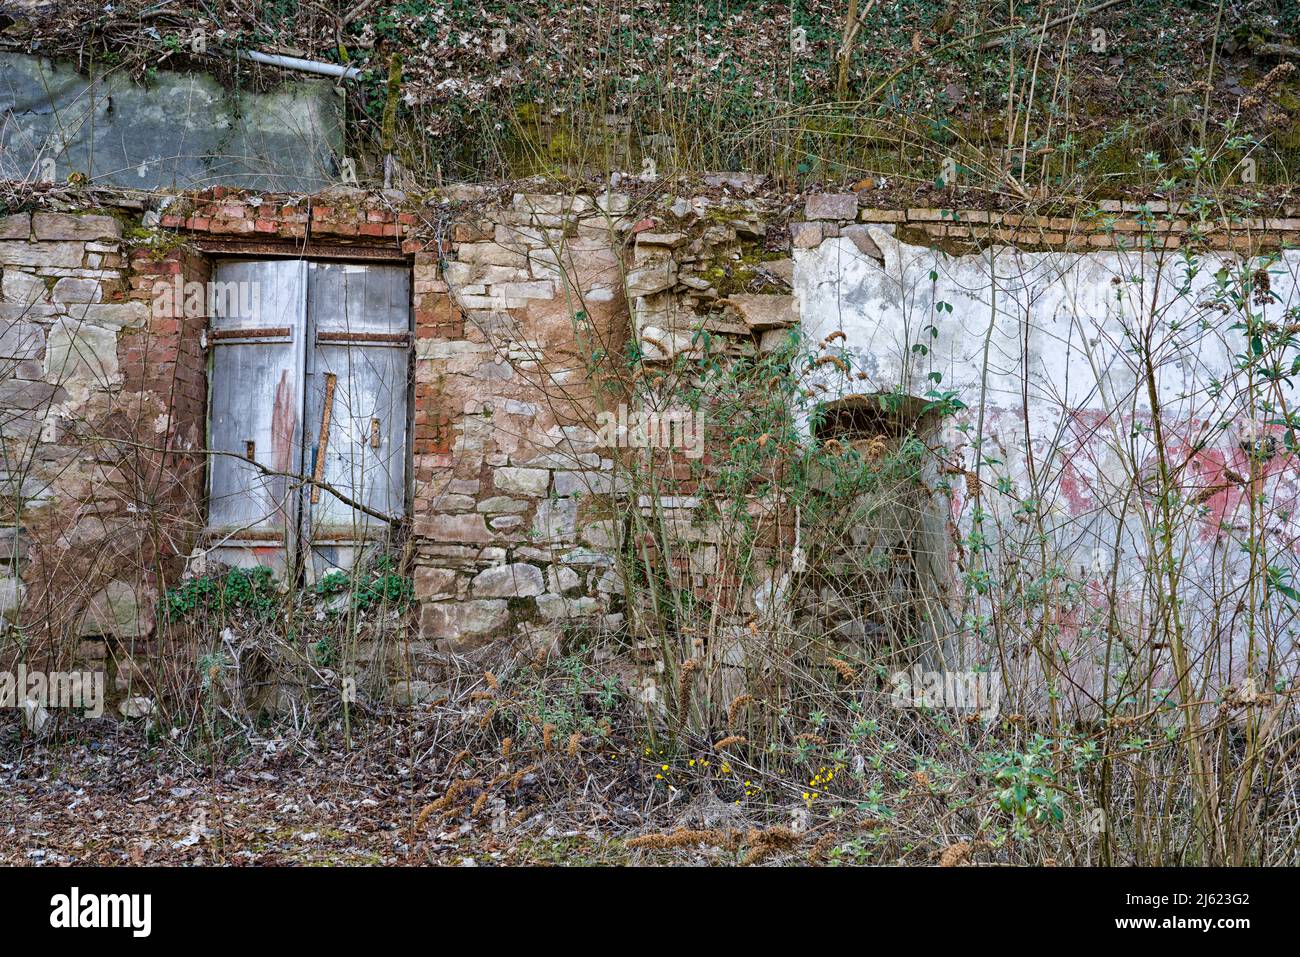 Remains of a house, Germany, Europe Stock Photo